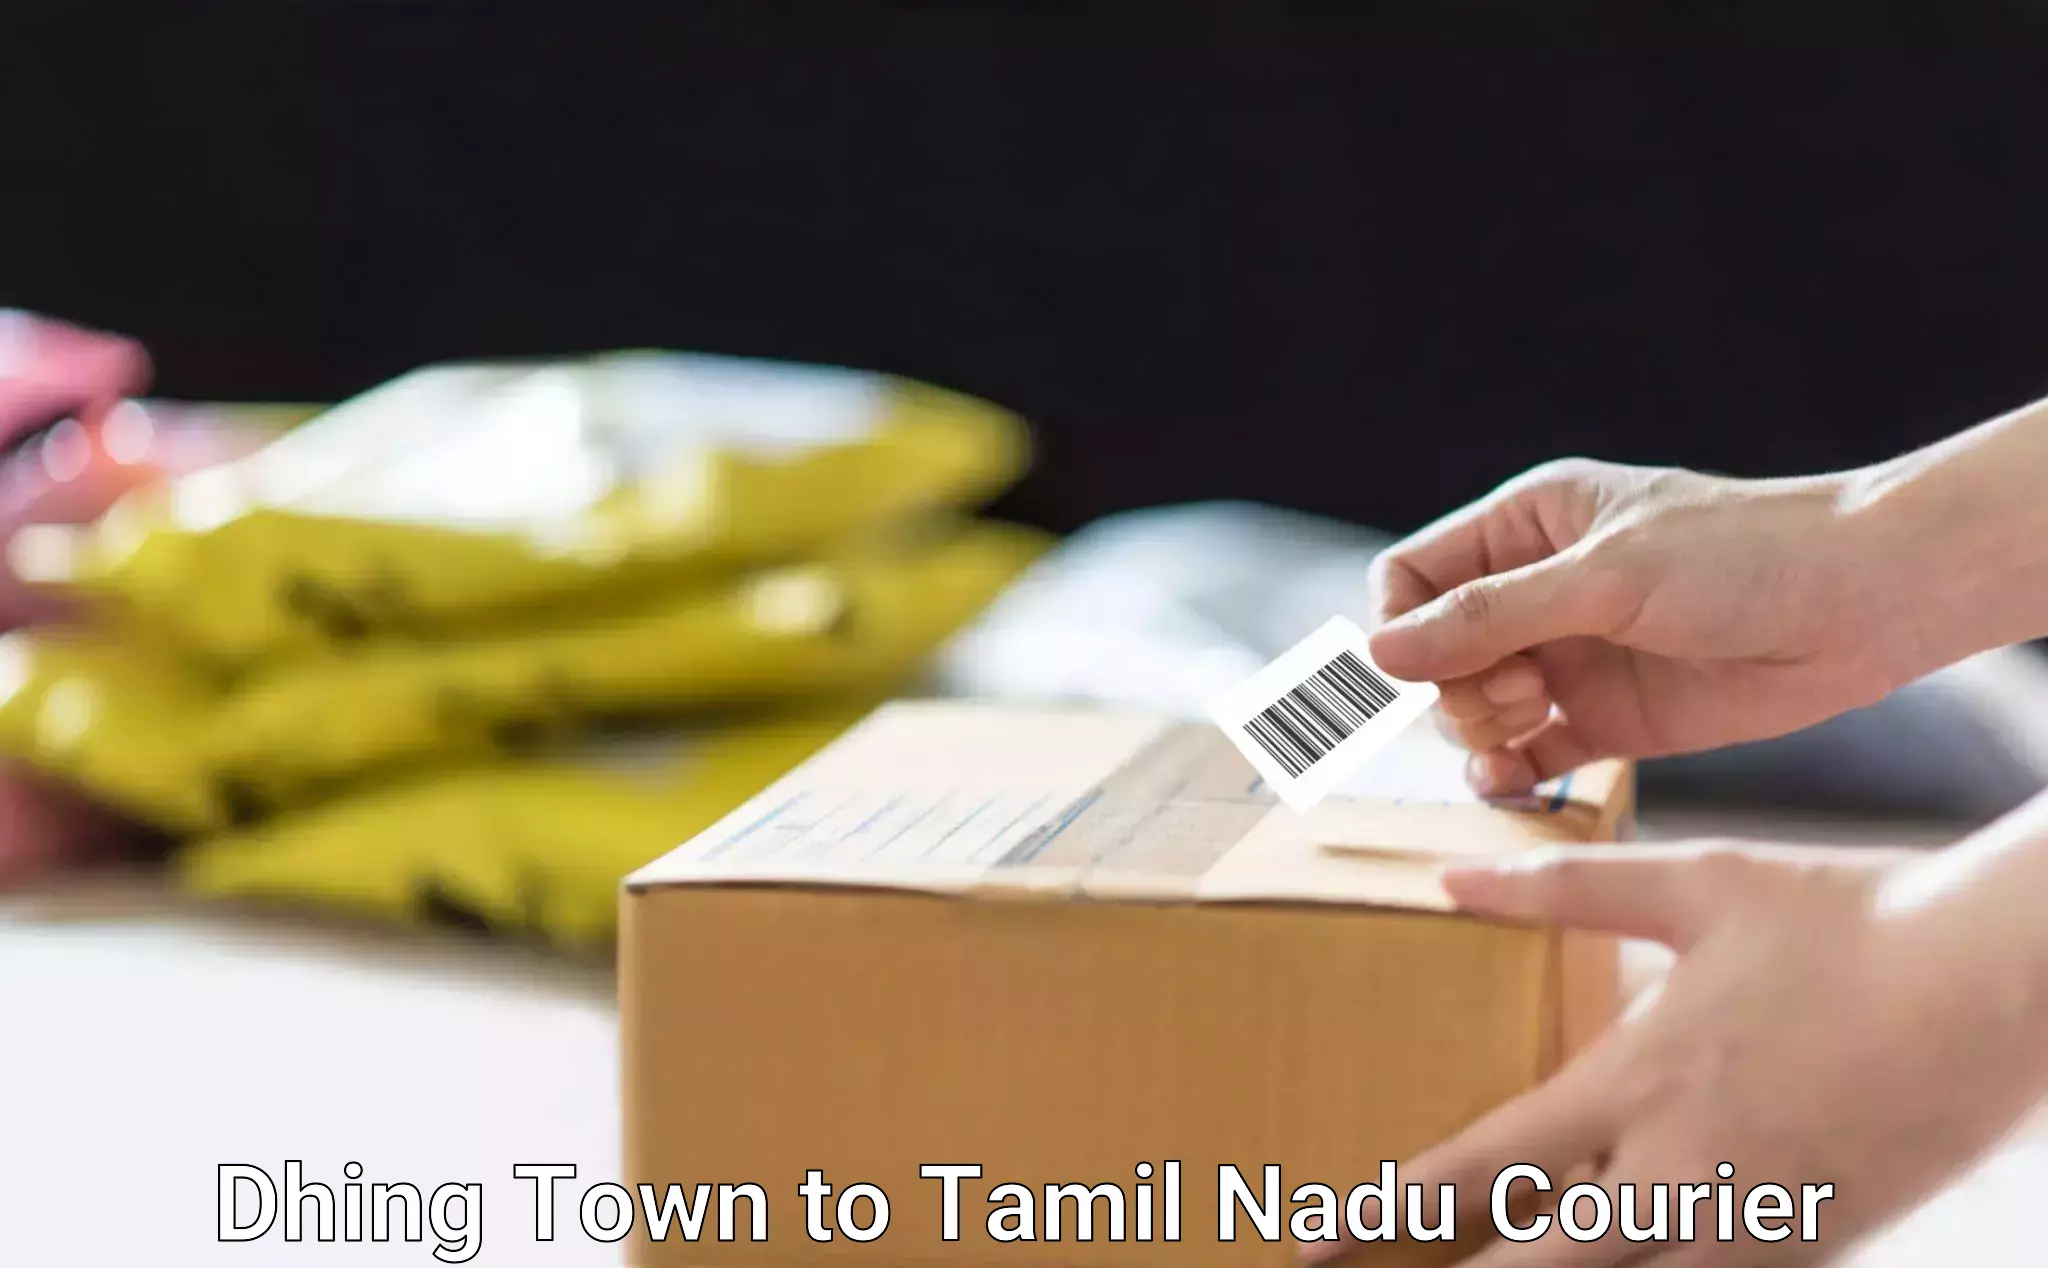 Courier tracking online Dhing Town to Chennai Port